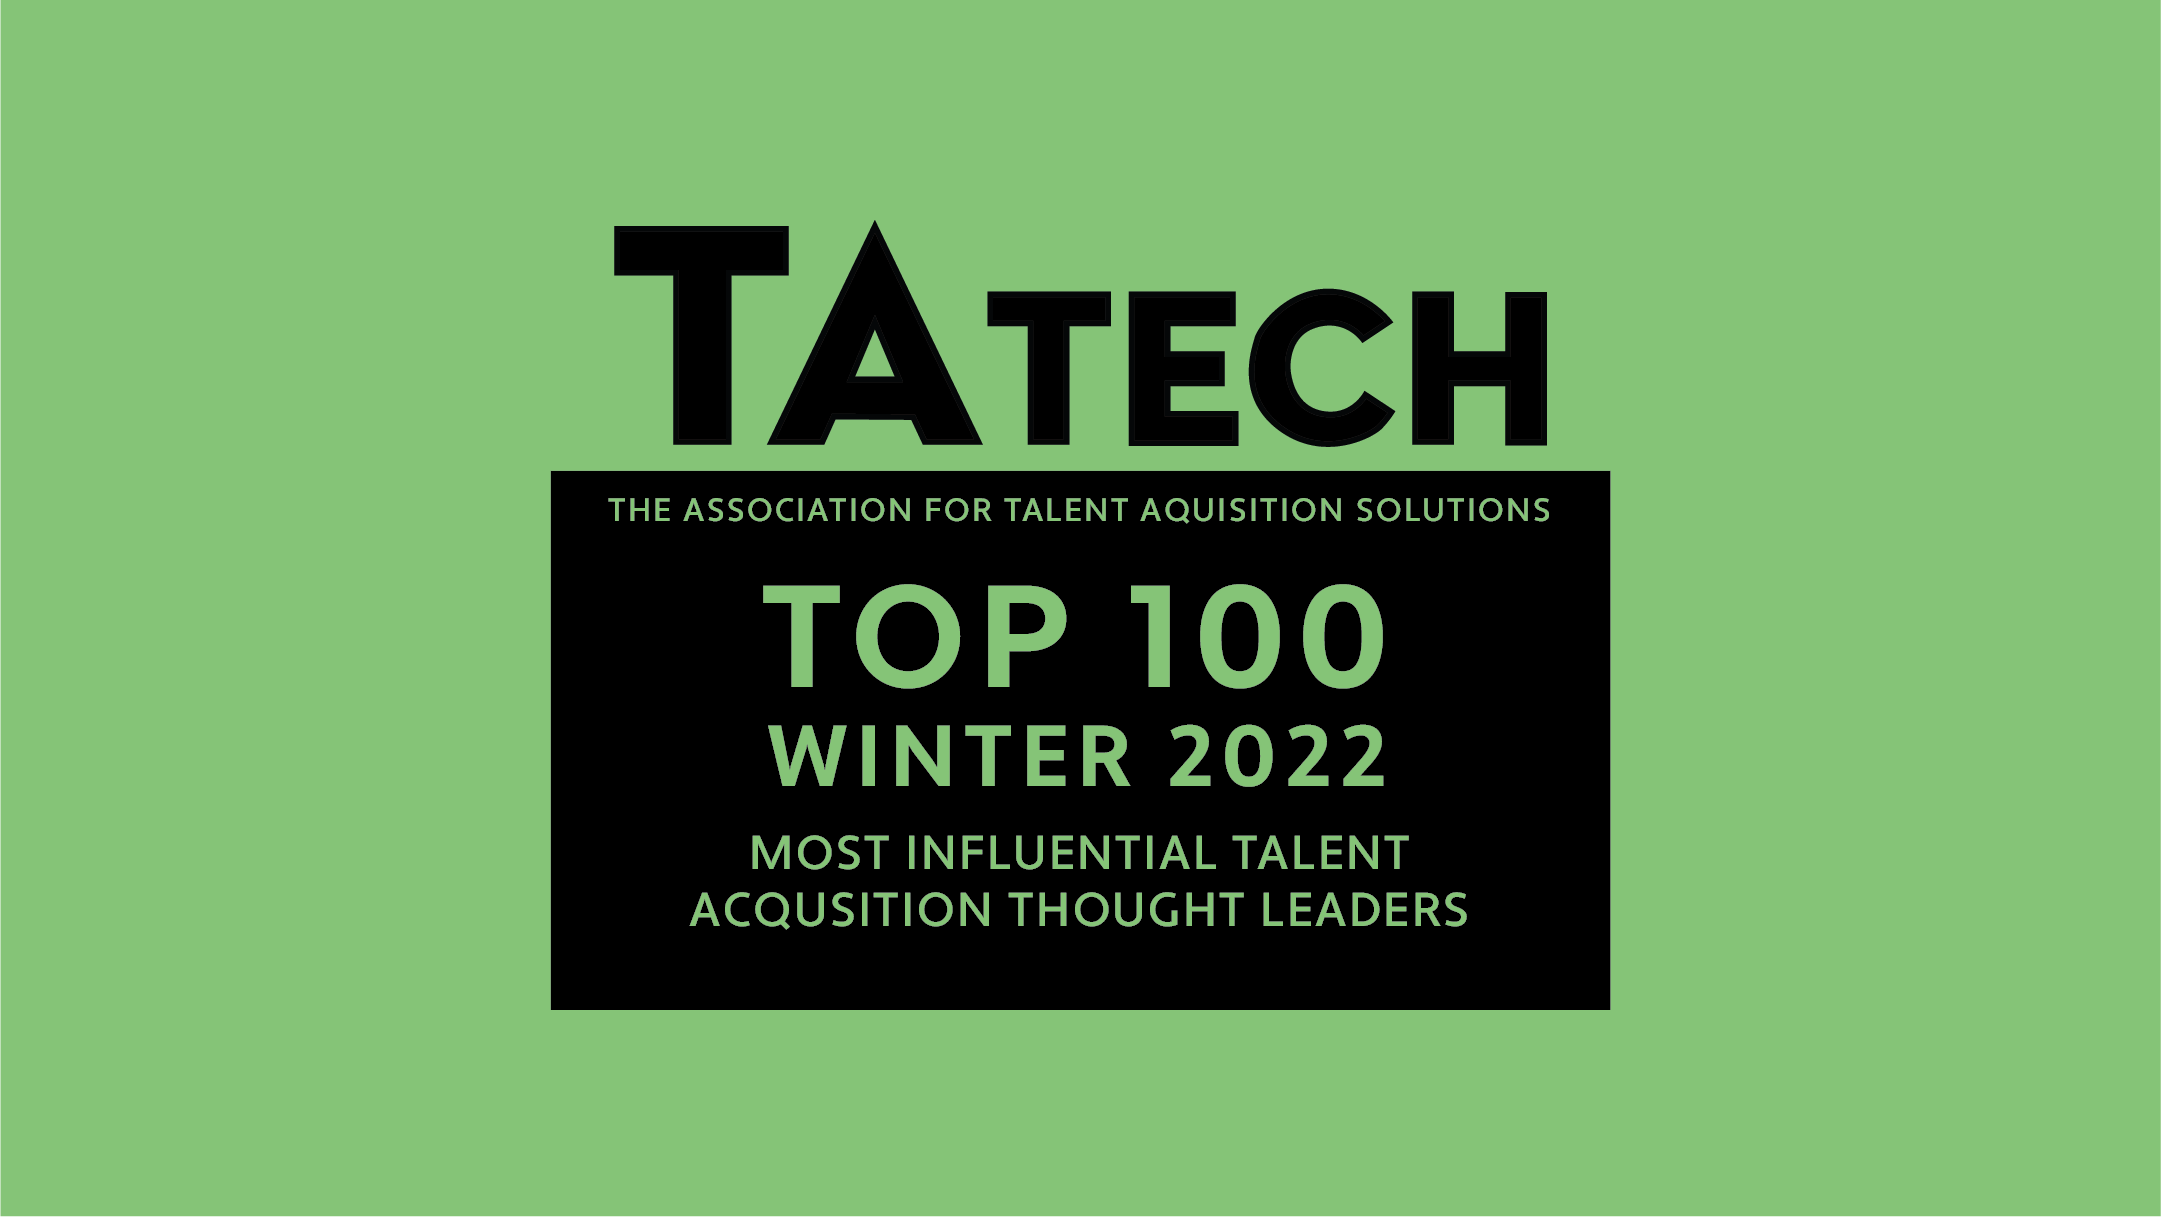 TA Tech Top 100 Winter 2022 2022, Most Influential Talent Acquisition Thought Leaders